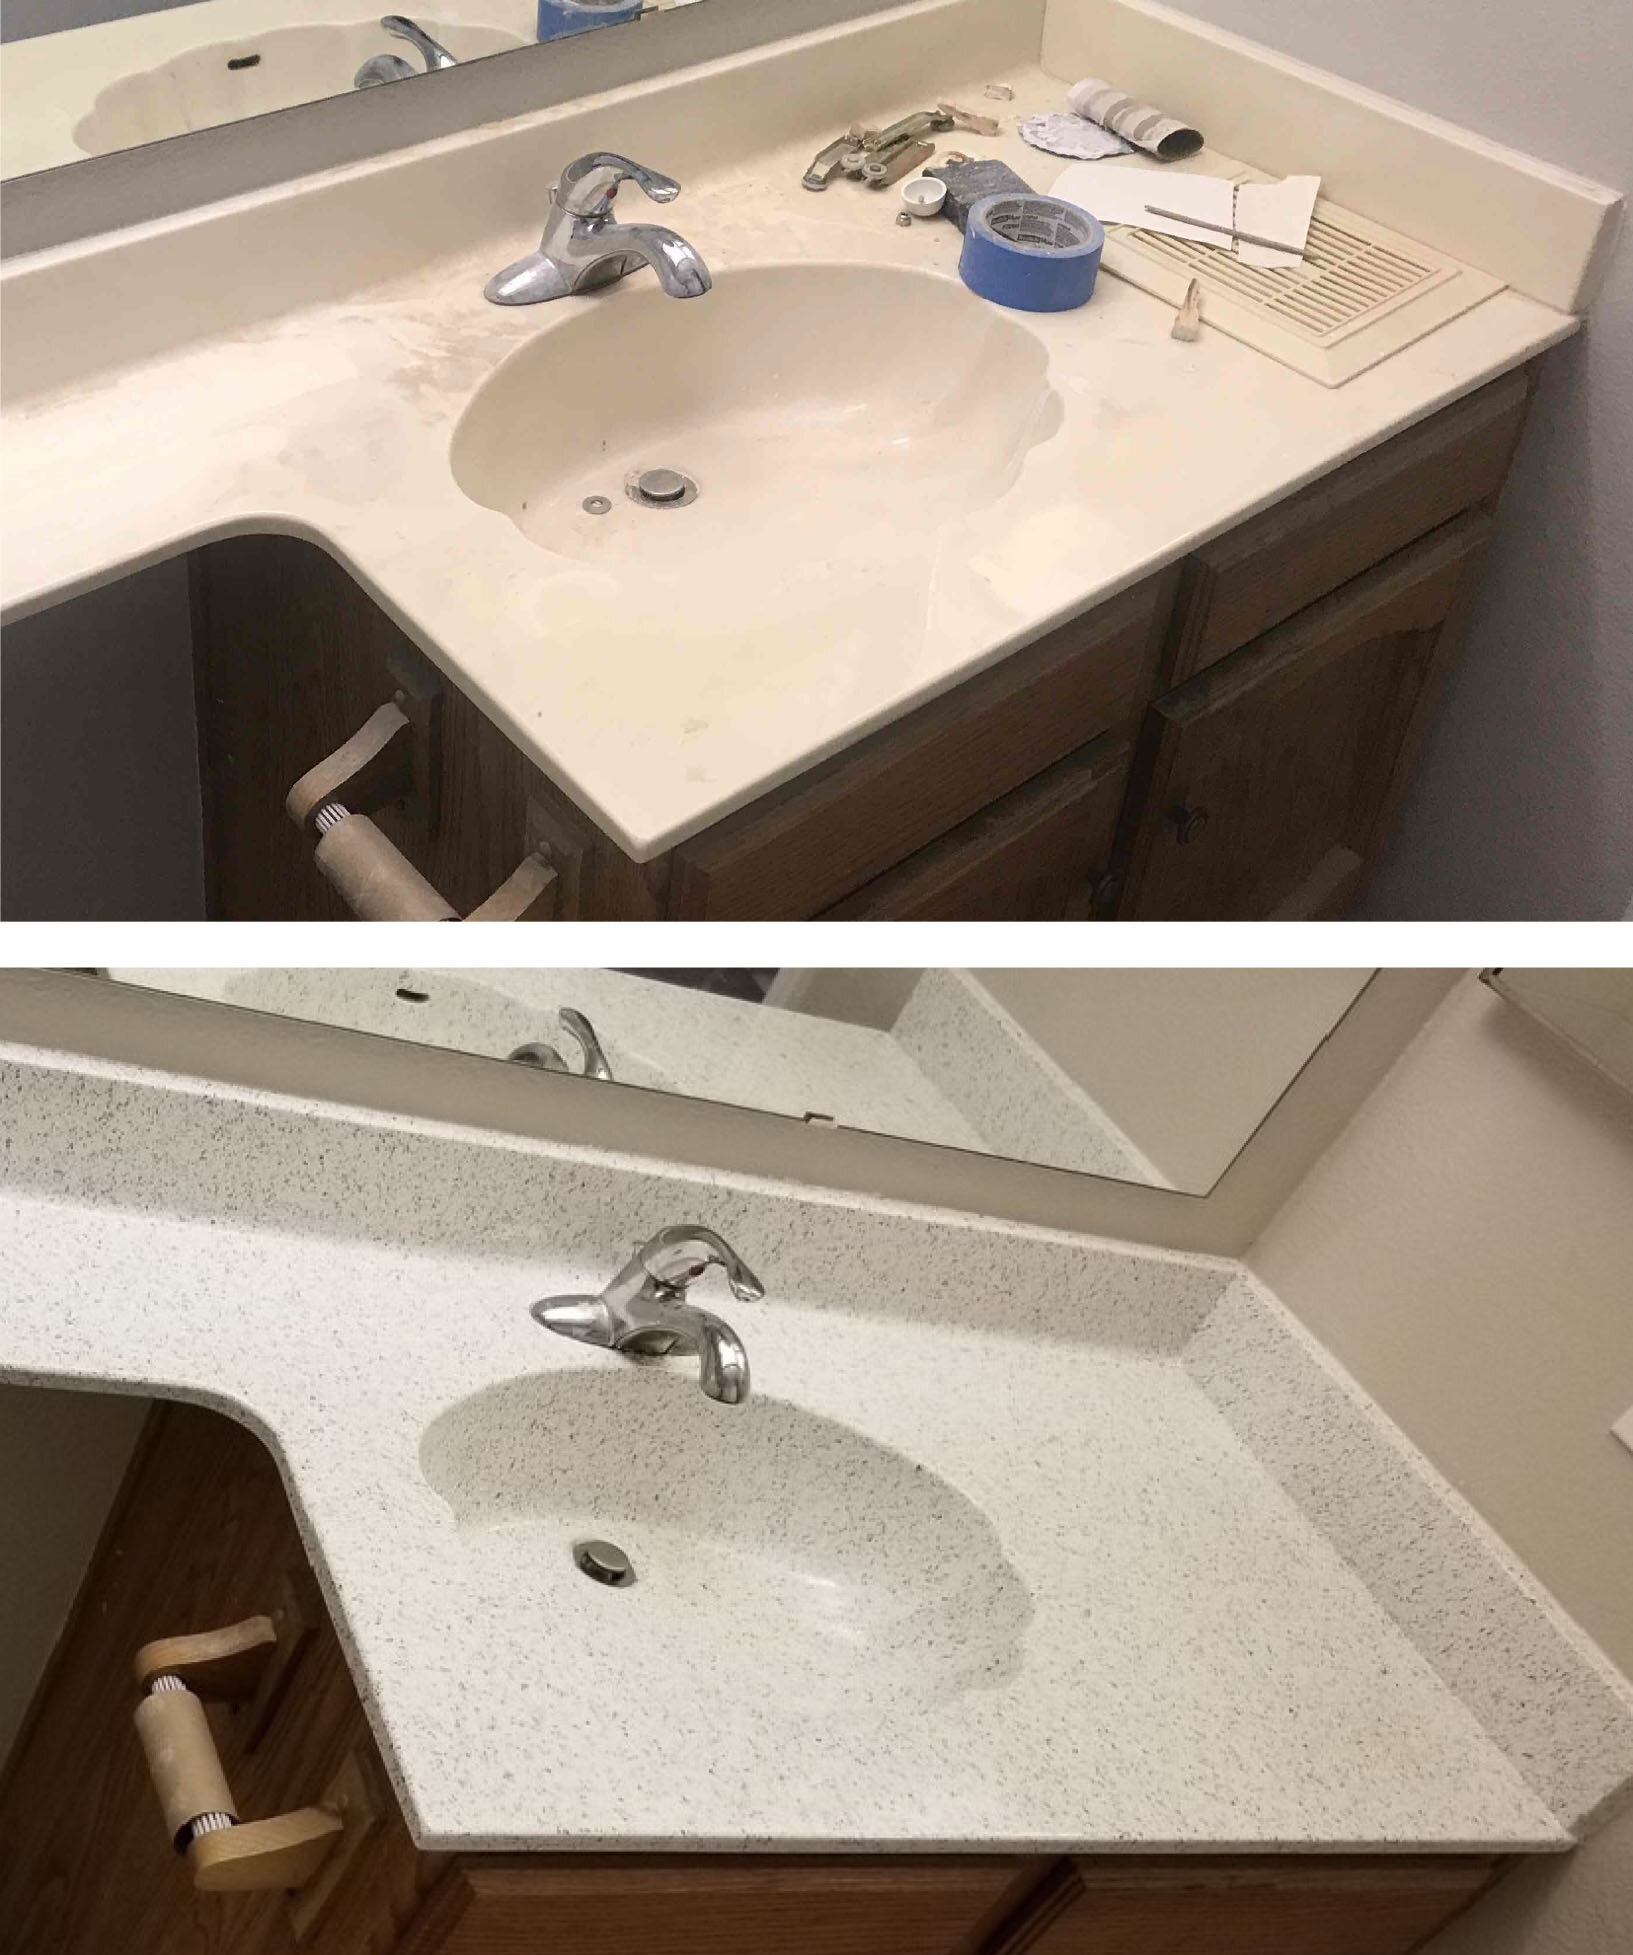   This White Vein Stonefleck gives this outdated bathroom countertop a much more neutral clean feel.  